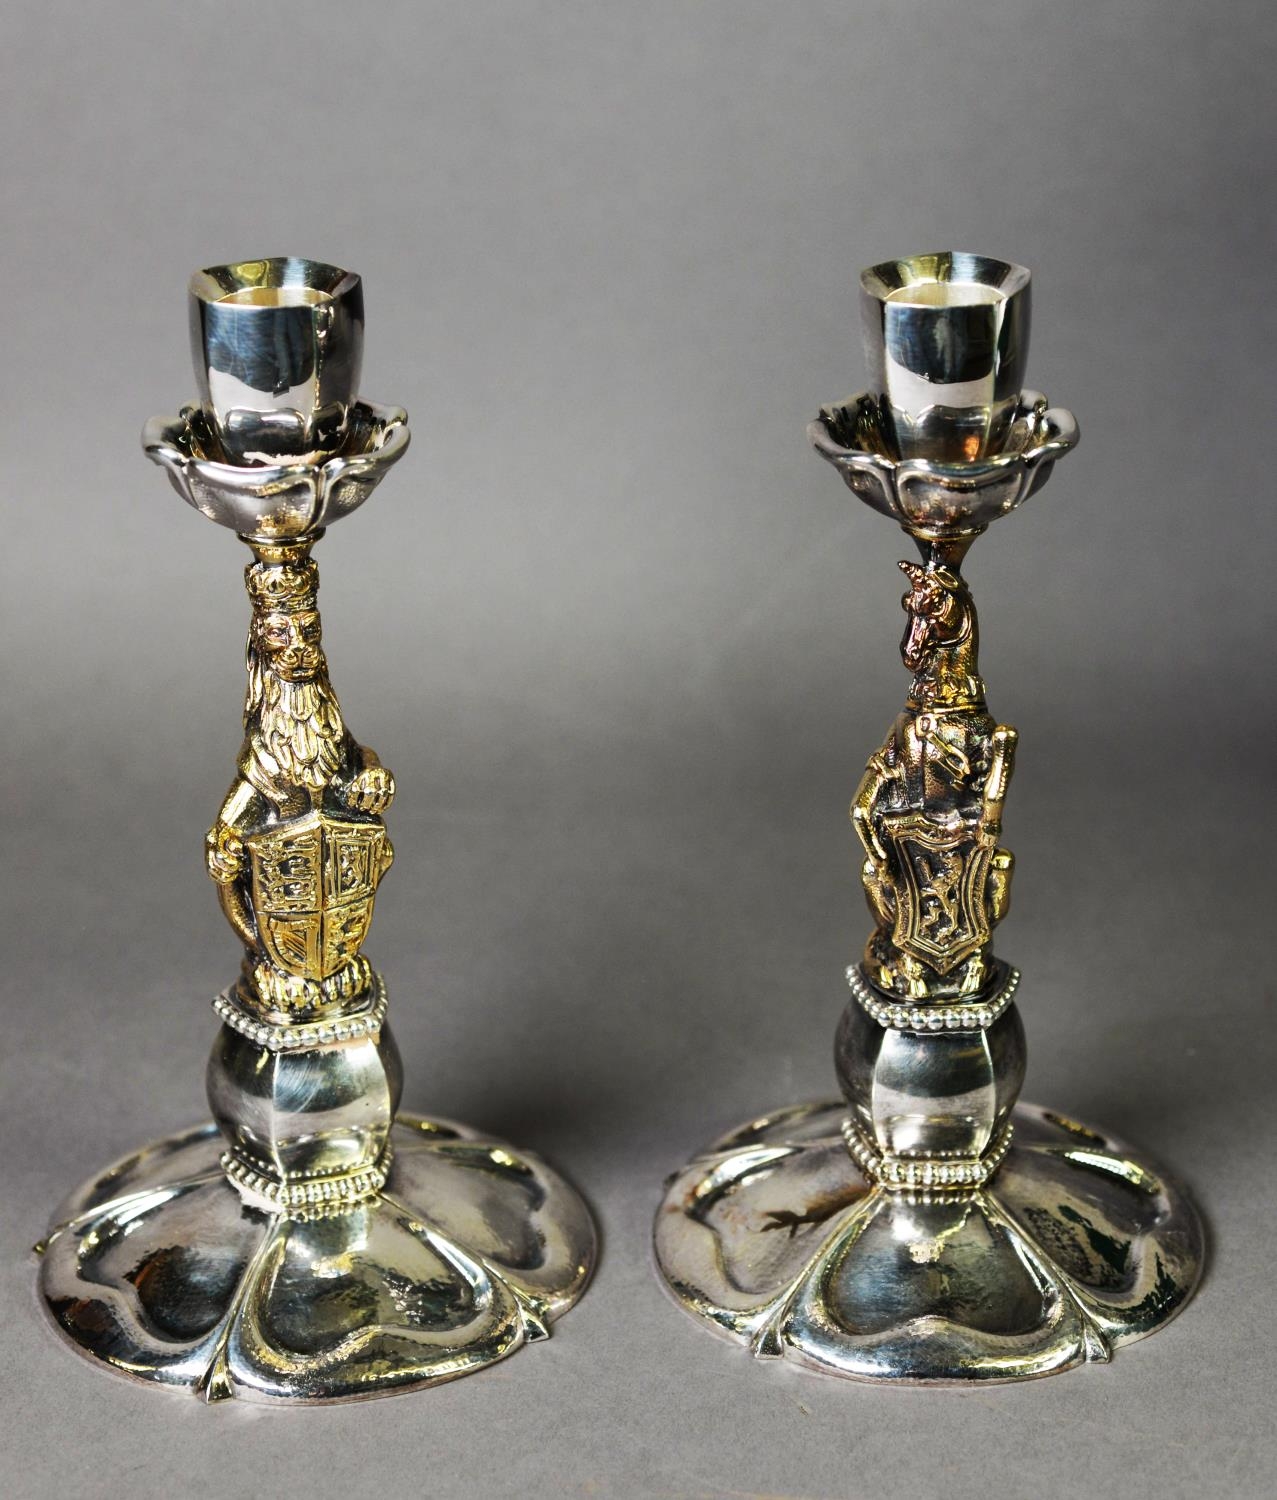 CASED PAIR OF LIMITED EDITION WEIGHTED SILVER AND GILT ‘QUEEN’S BEASTS CANDLESTICKS’ BY RICHARD